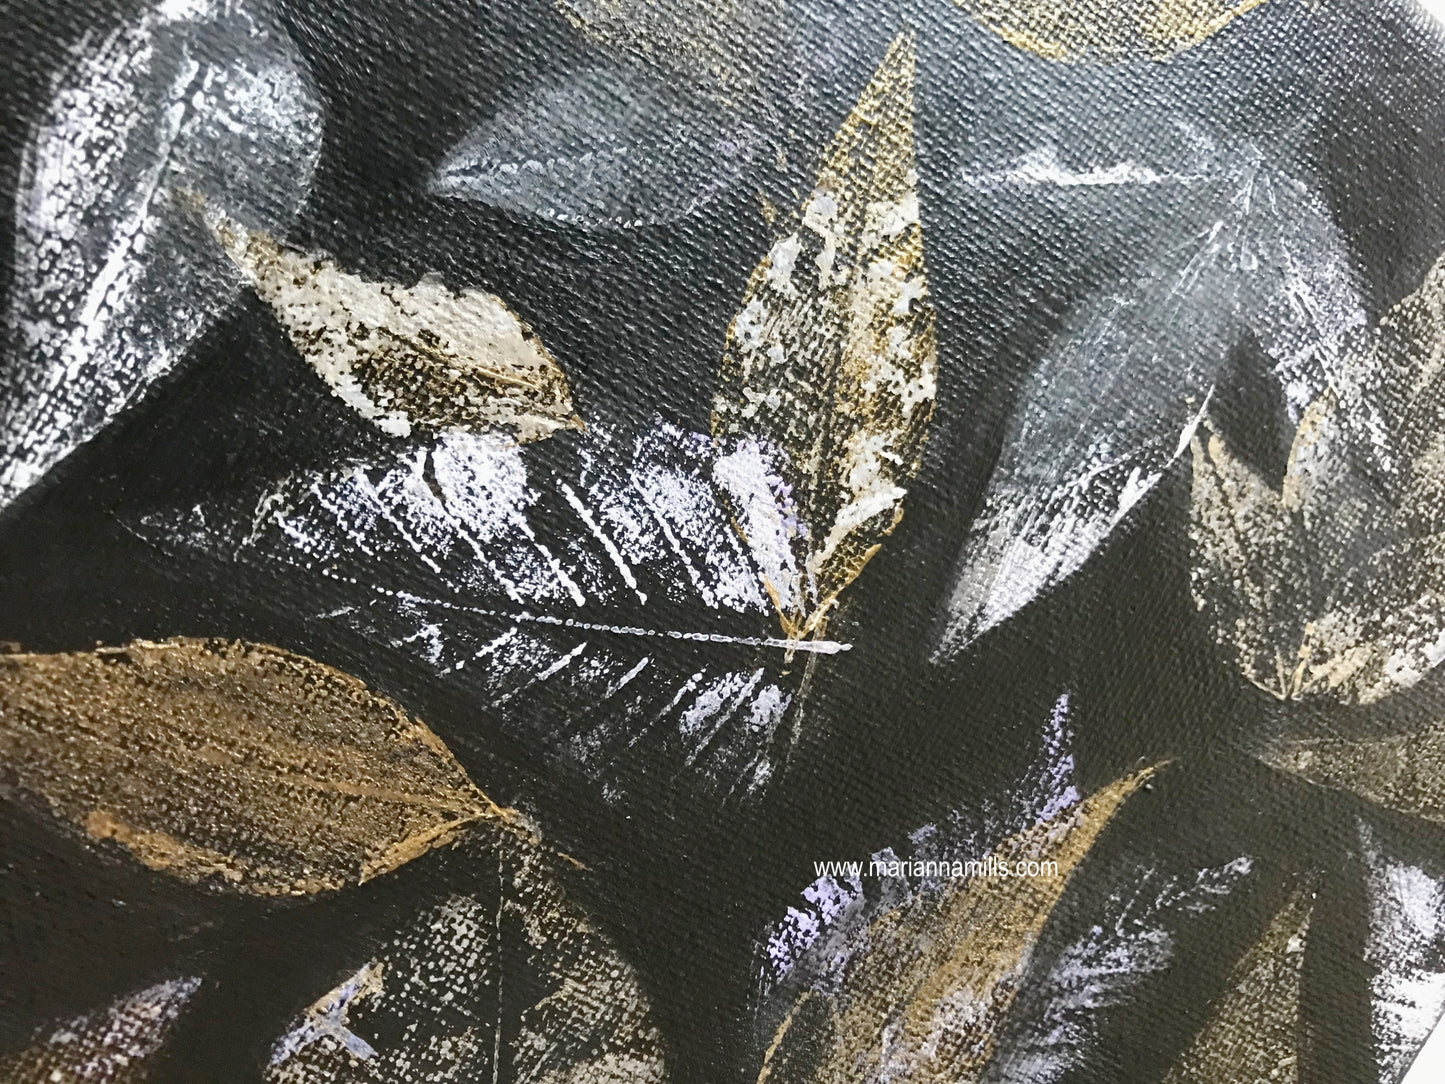 Leaf Abstract Mixed Media Painting by Marianna Mills | 8"x8" detail